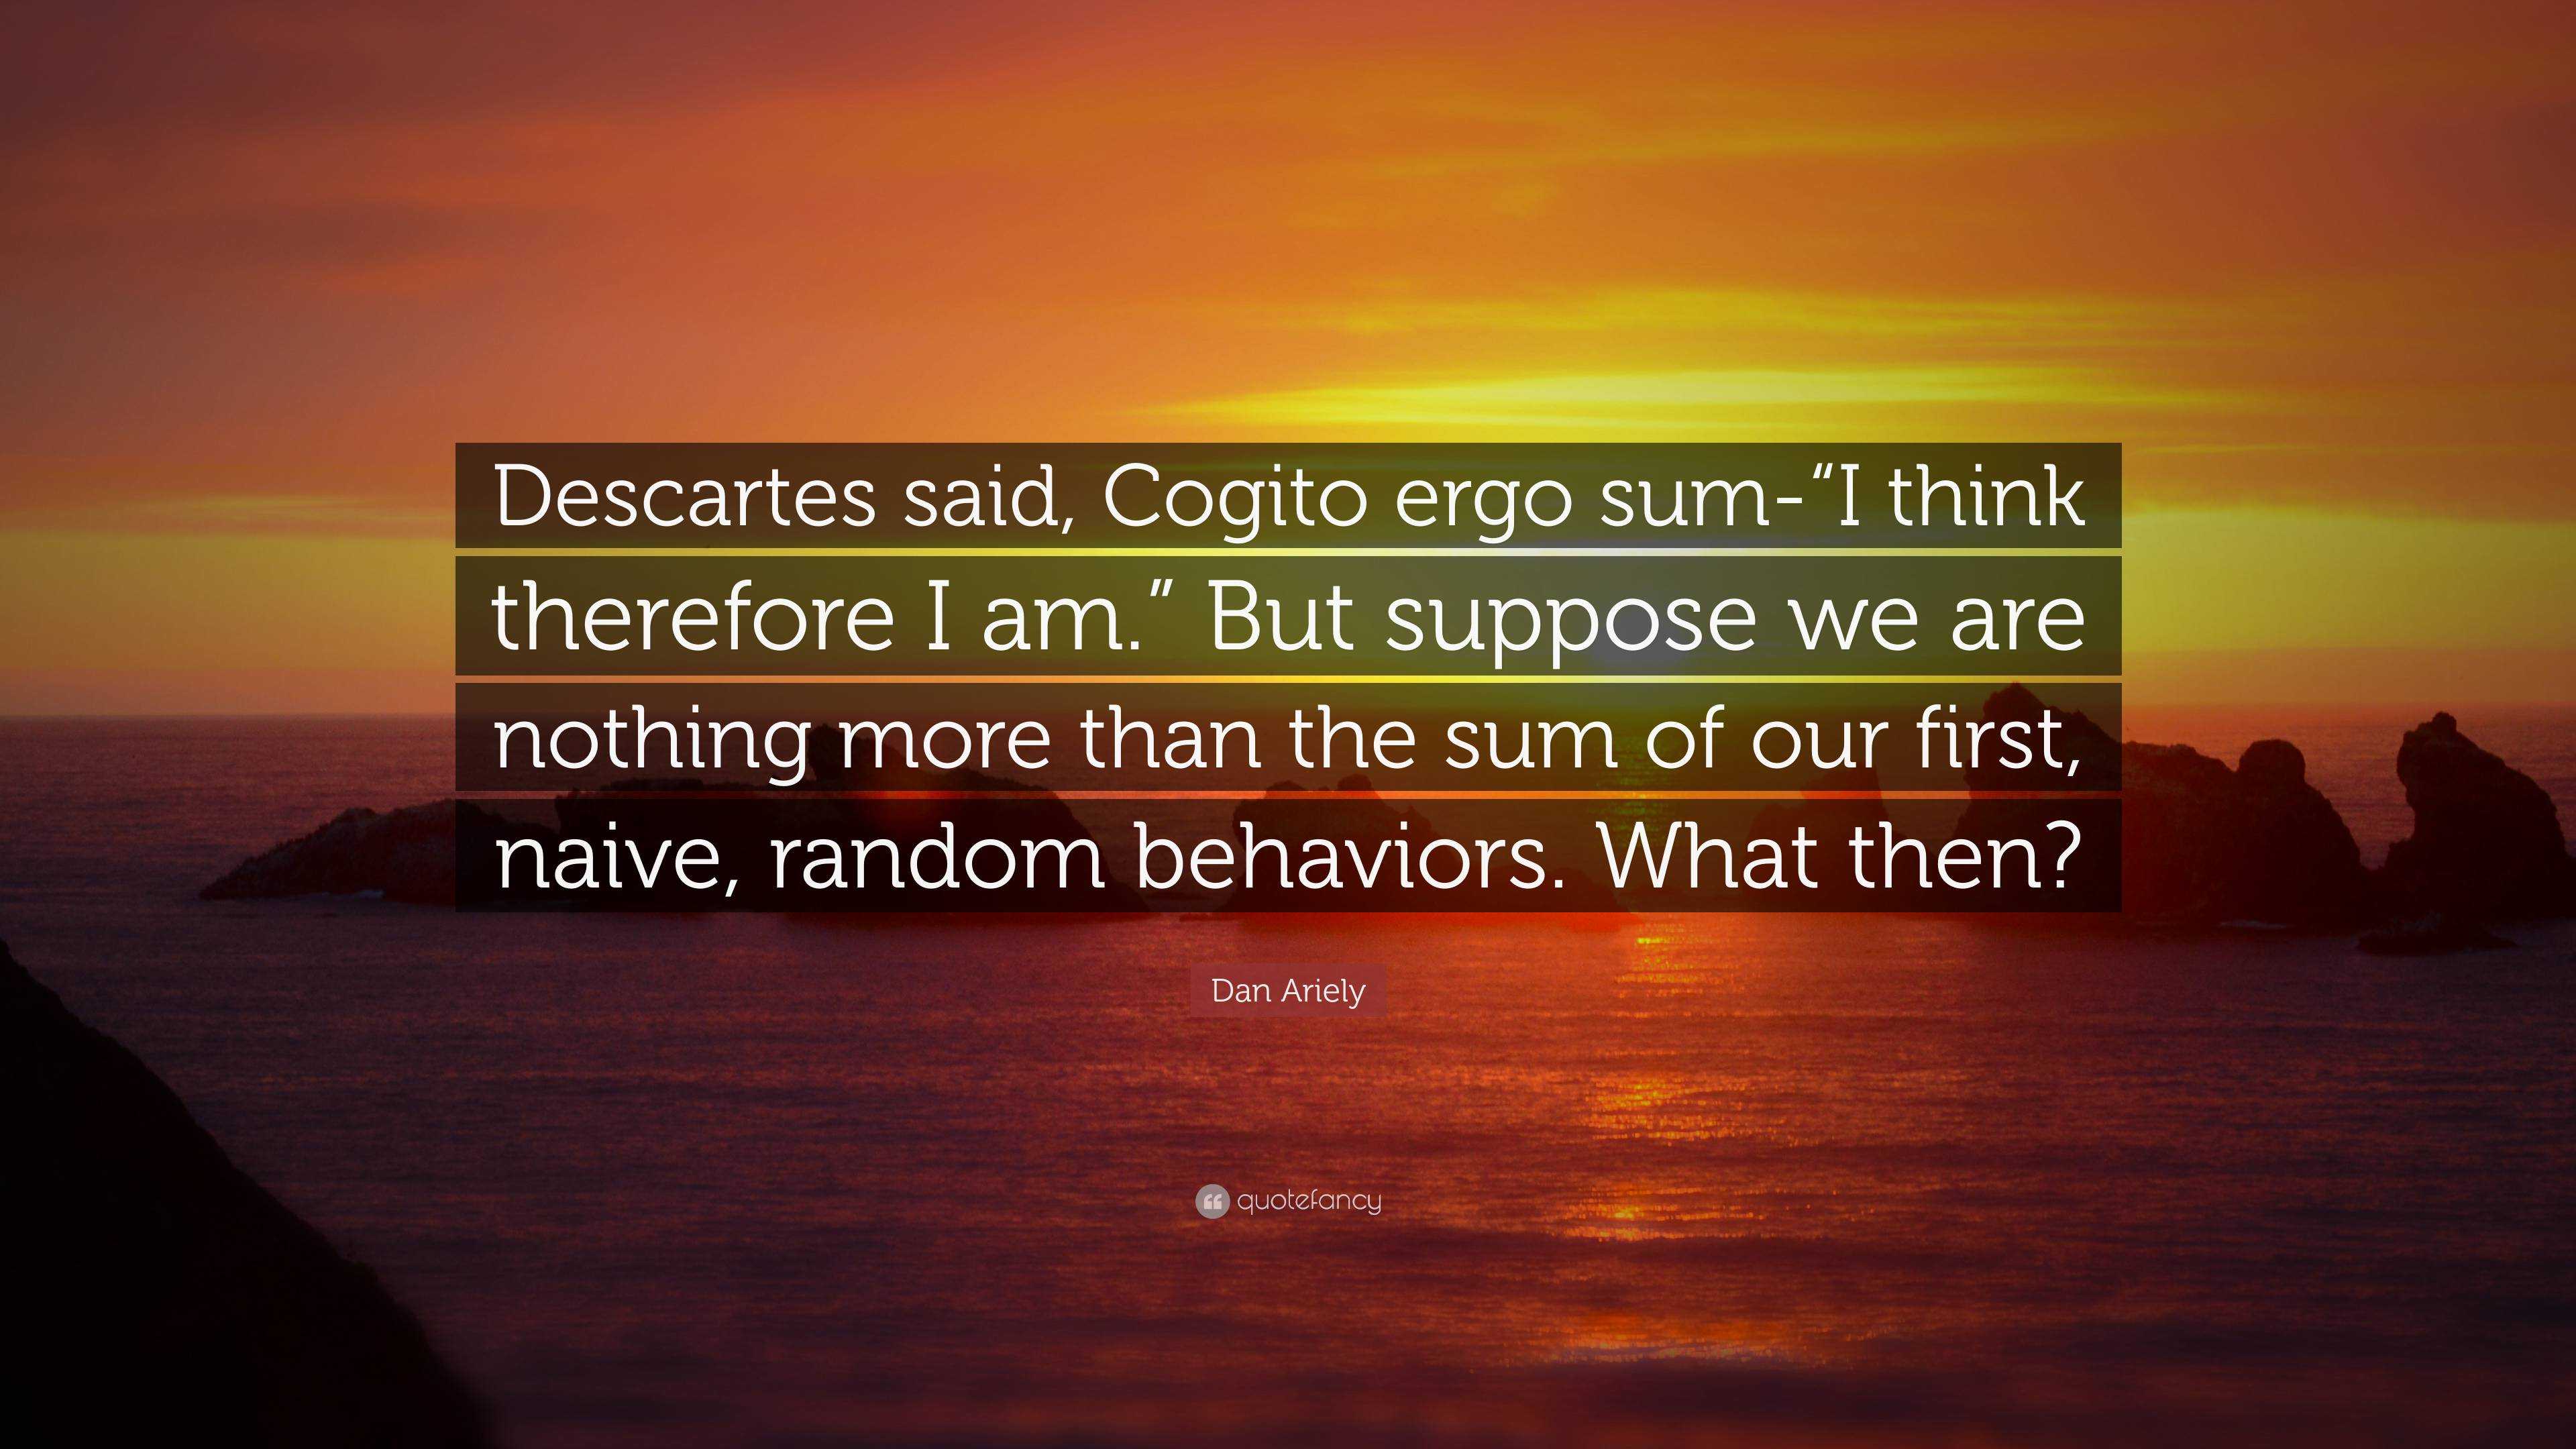 Dan Ariely Quote Descartes Said Cogito Ergo Sum I Think Therefore I Am But Suppose We Are Nothing More Than The Sum Of Our First Nai